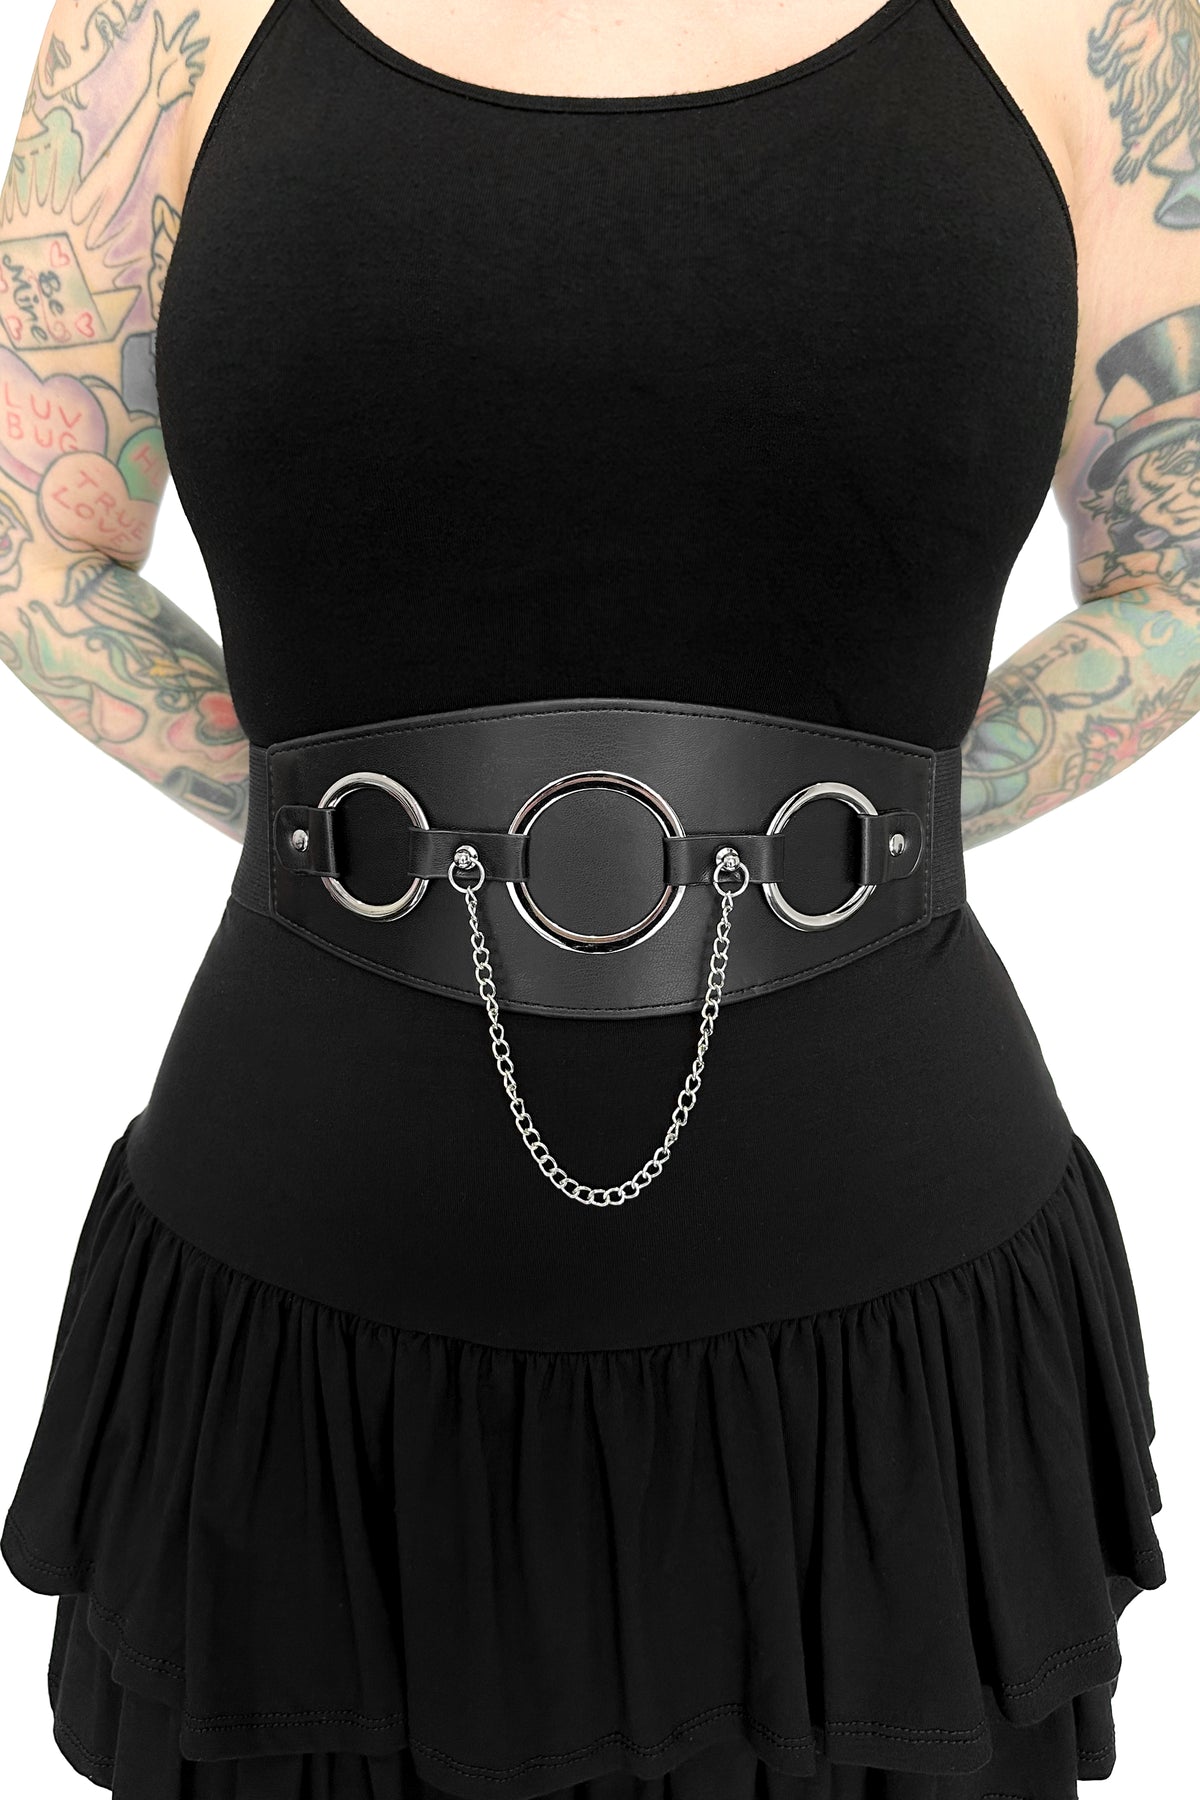 black faux leather belt with 3 silver rings and hanging silver chain